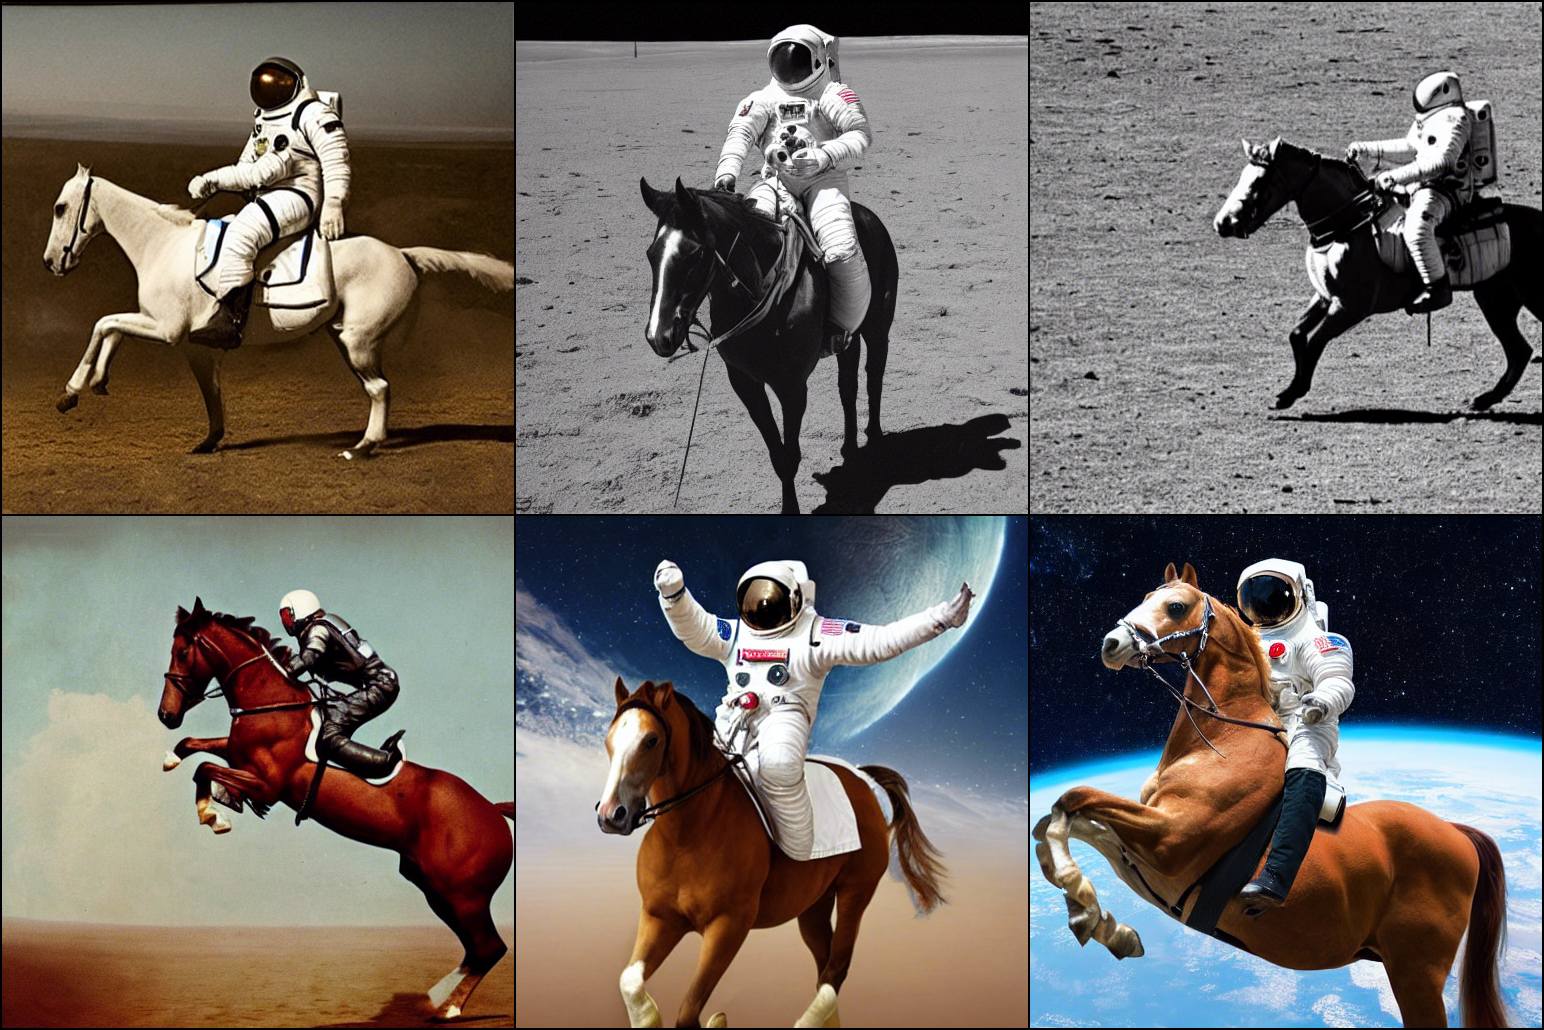 stable-diffusion-photograph-of-an-astronaut-riding-a-horse